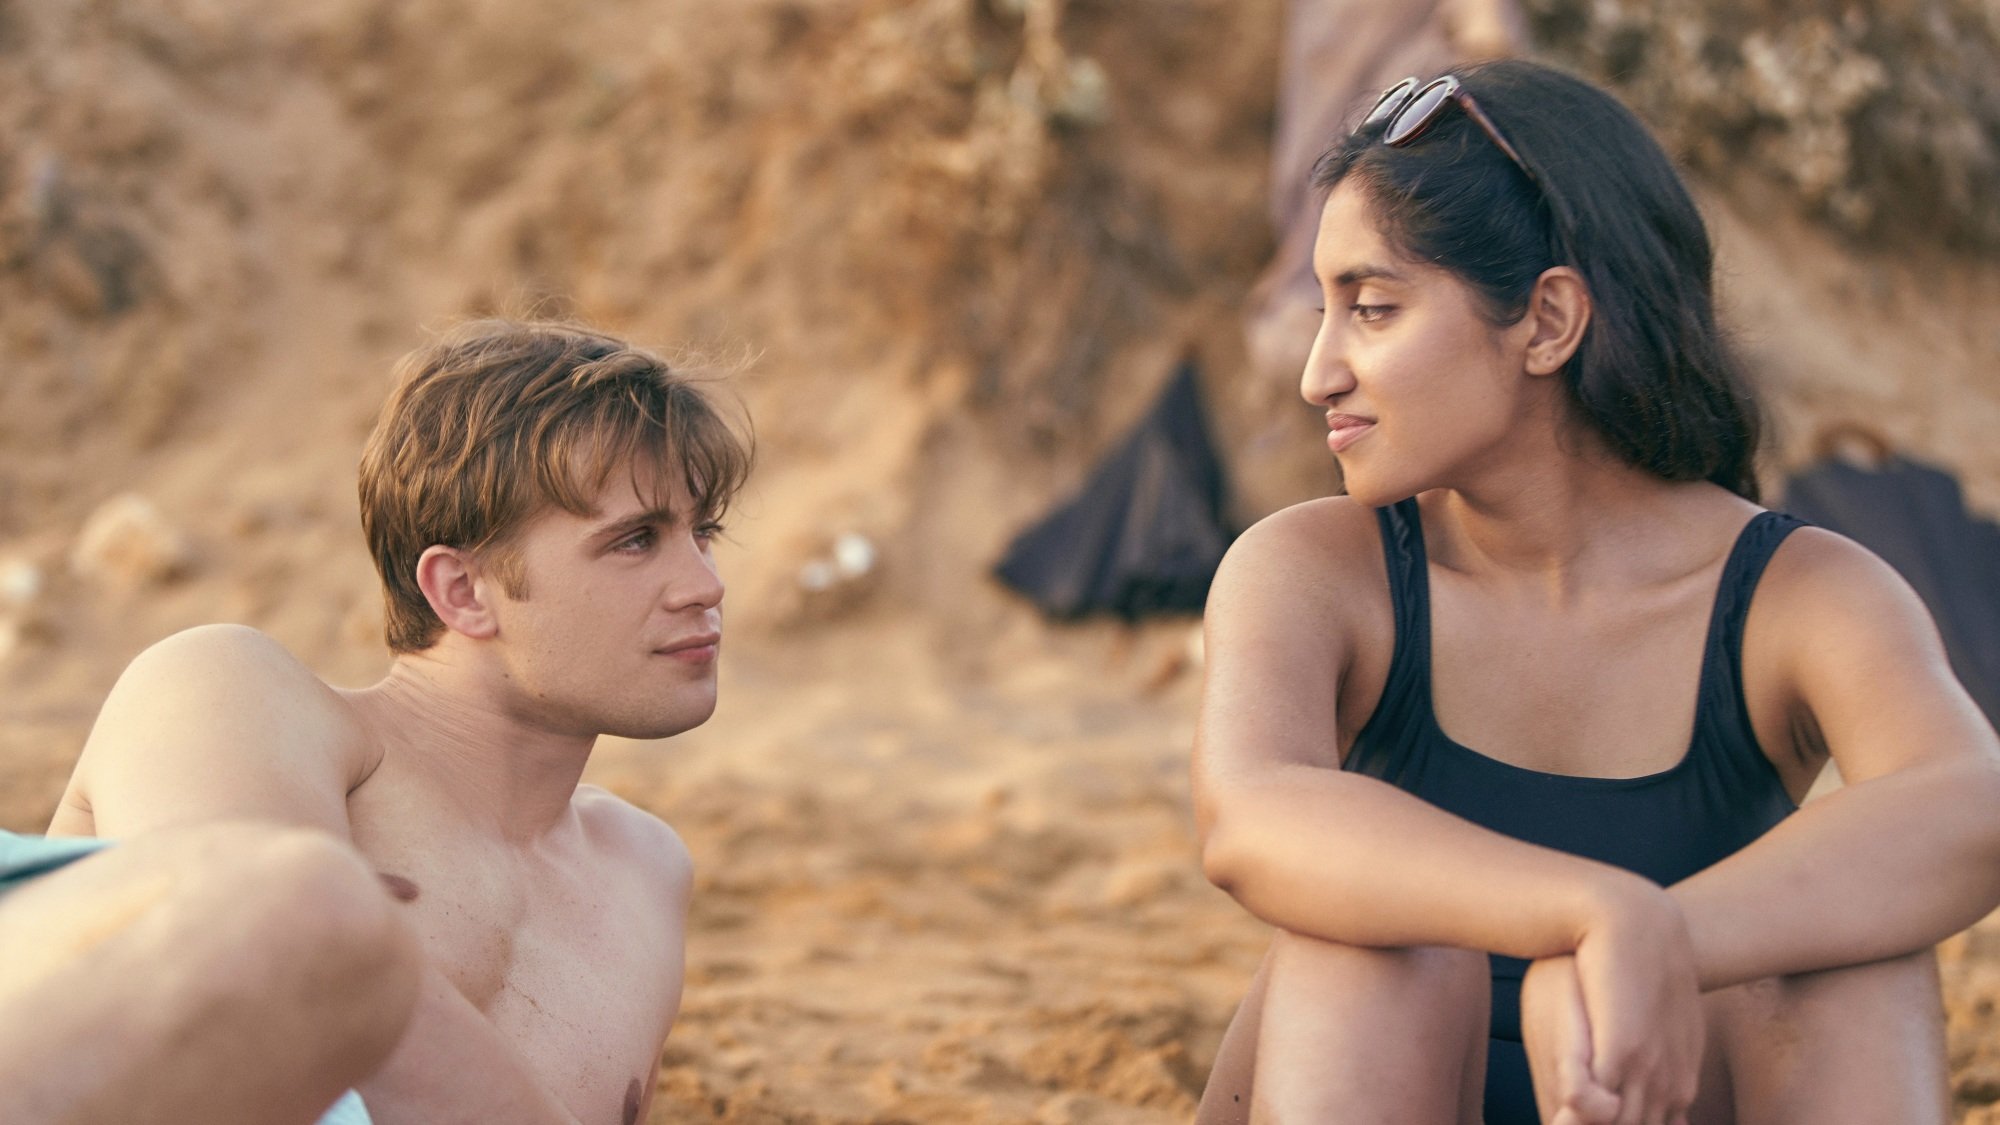 A man and woman look at each other while at a beach.